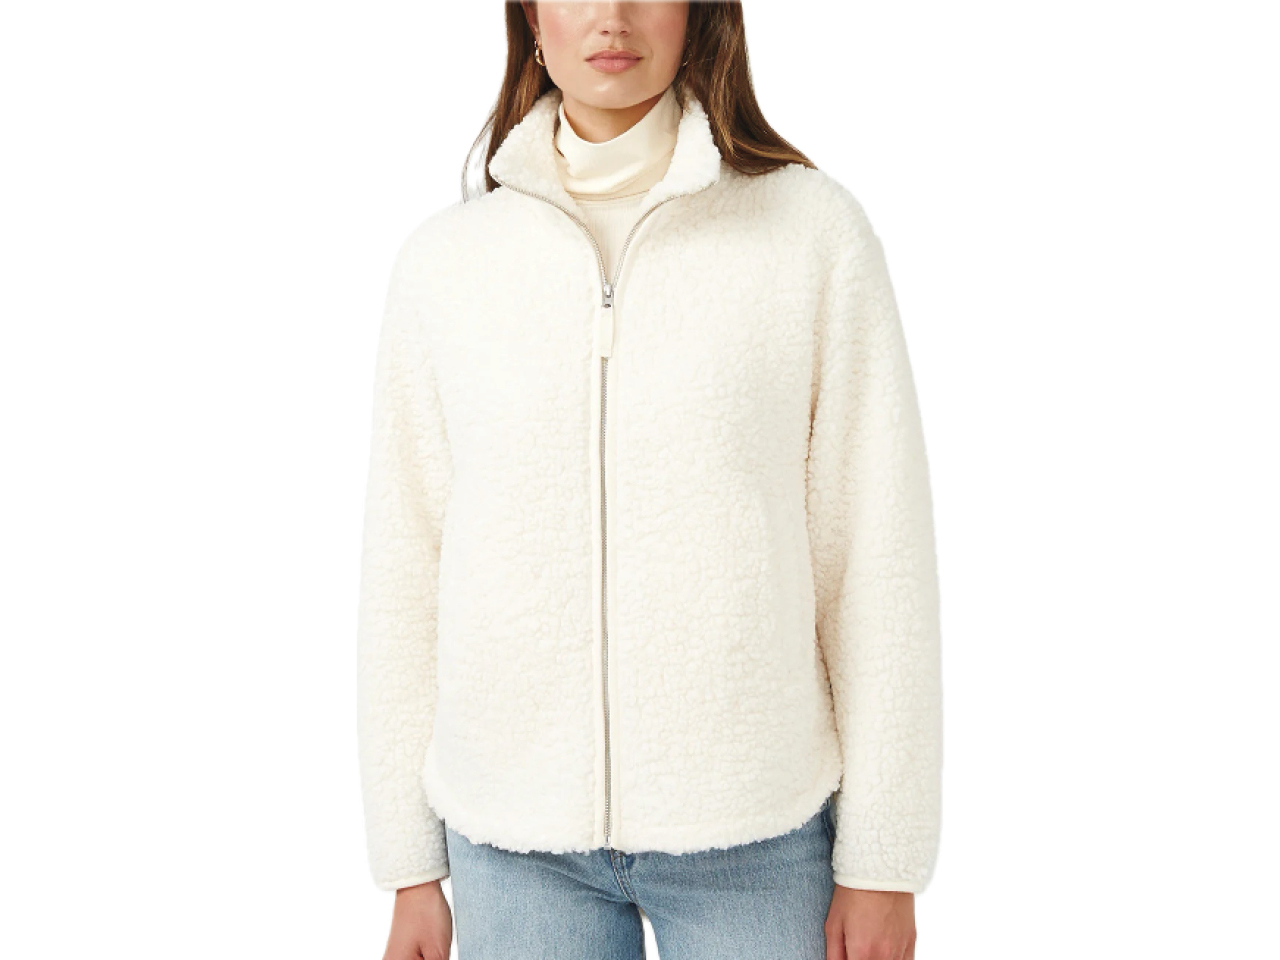 A woman in a white sherpa-like Buffalo jacket. as part of the best Boxing Day deals.